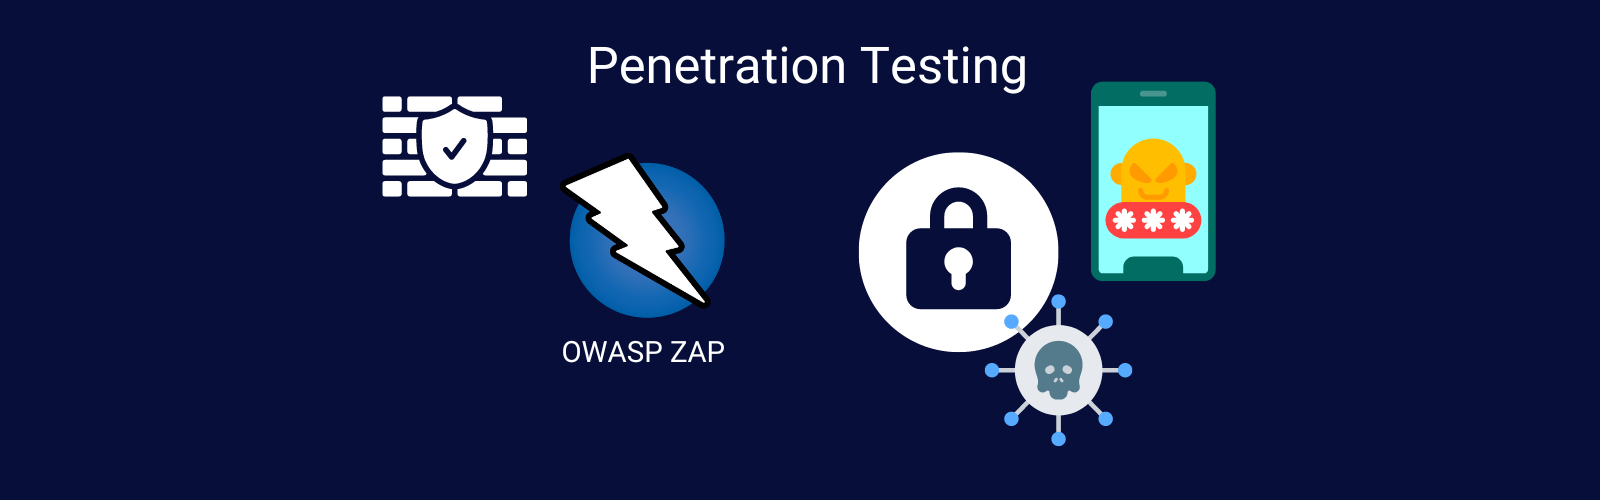 6 Essential Steps to Use OWASP ZAP for Penetration Testing main image